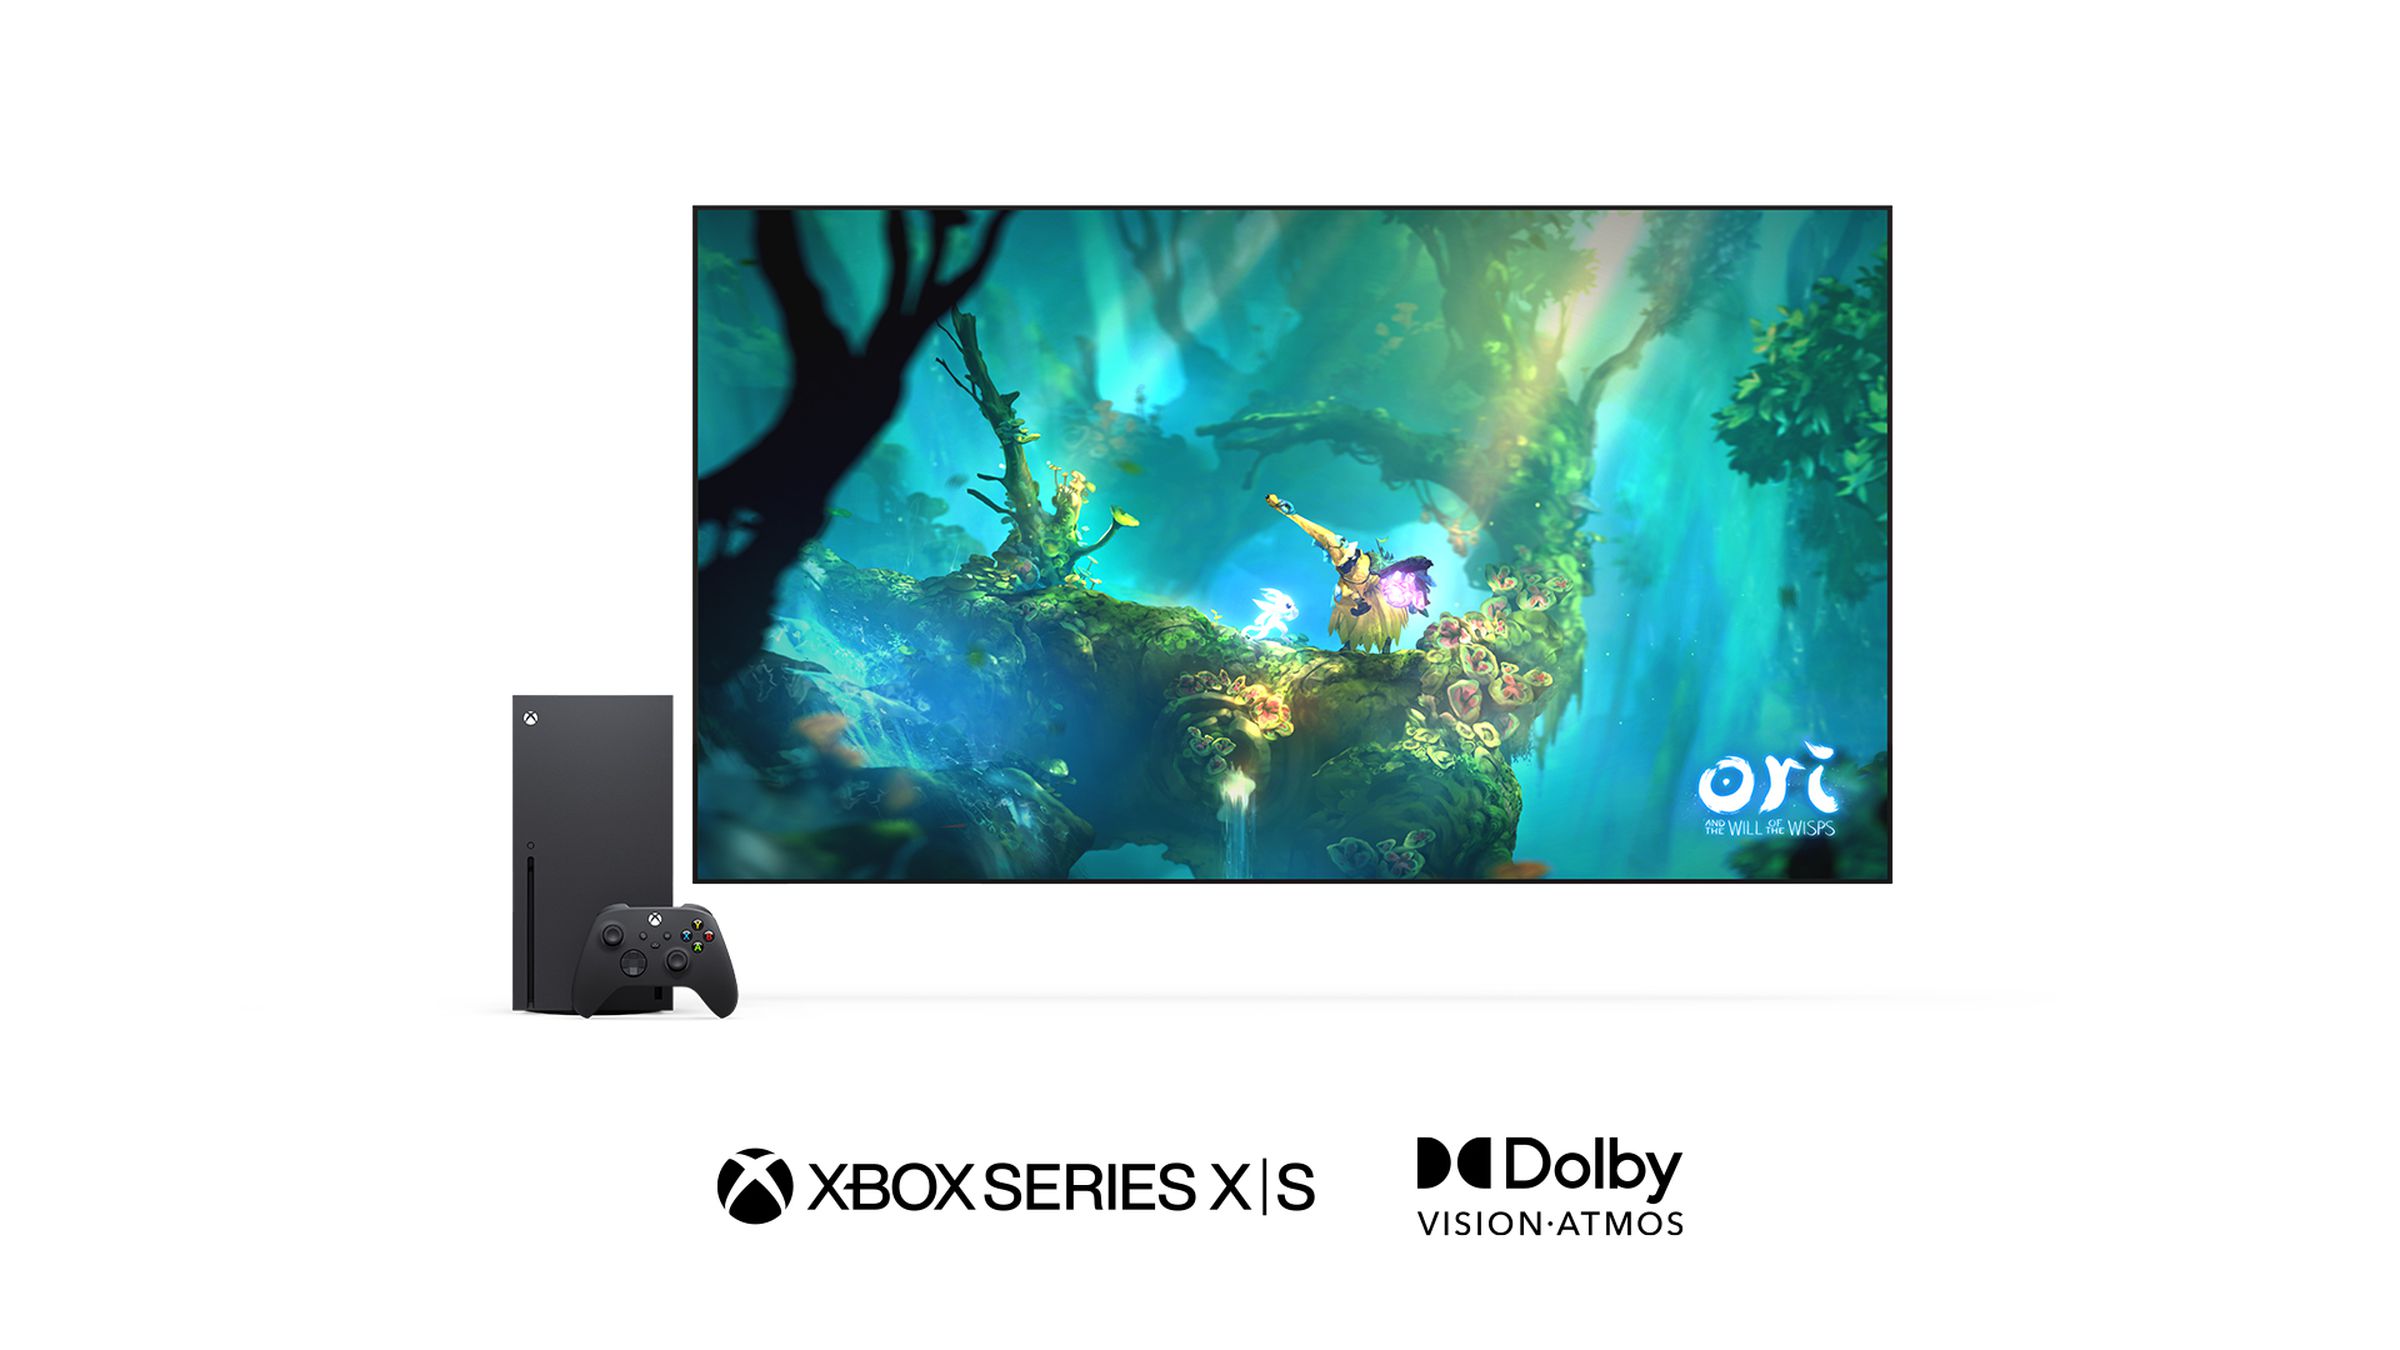 Xbox consoles are the first to support Dolby Vision for gaming.